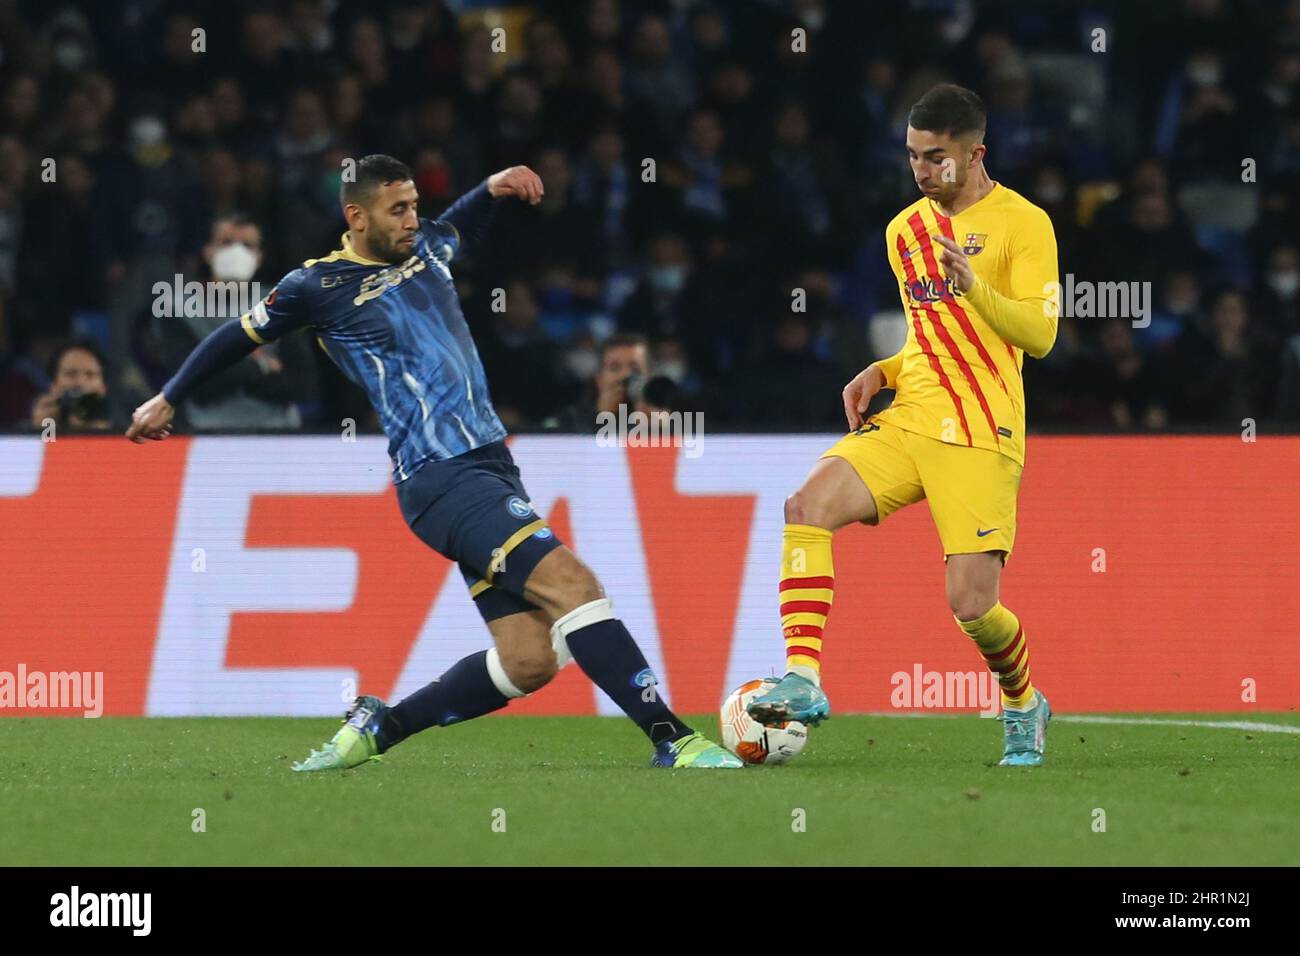 SSC Napoli's Algerian defender Faouzi Ghoulam  challenges for the ball with Barcellona's Usa defender Sergino Dest during the UEFA Europa League football match between SSC Napoli and Barcellona at the Diego Armando Maradona Stadium in Naples, southern Italy, on February 24, 2022. Stock Photo